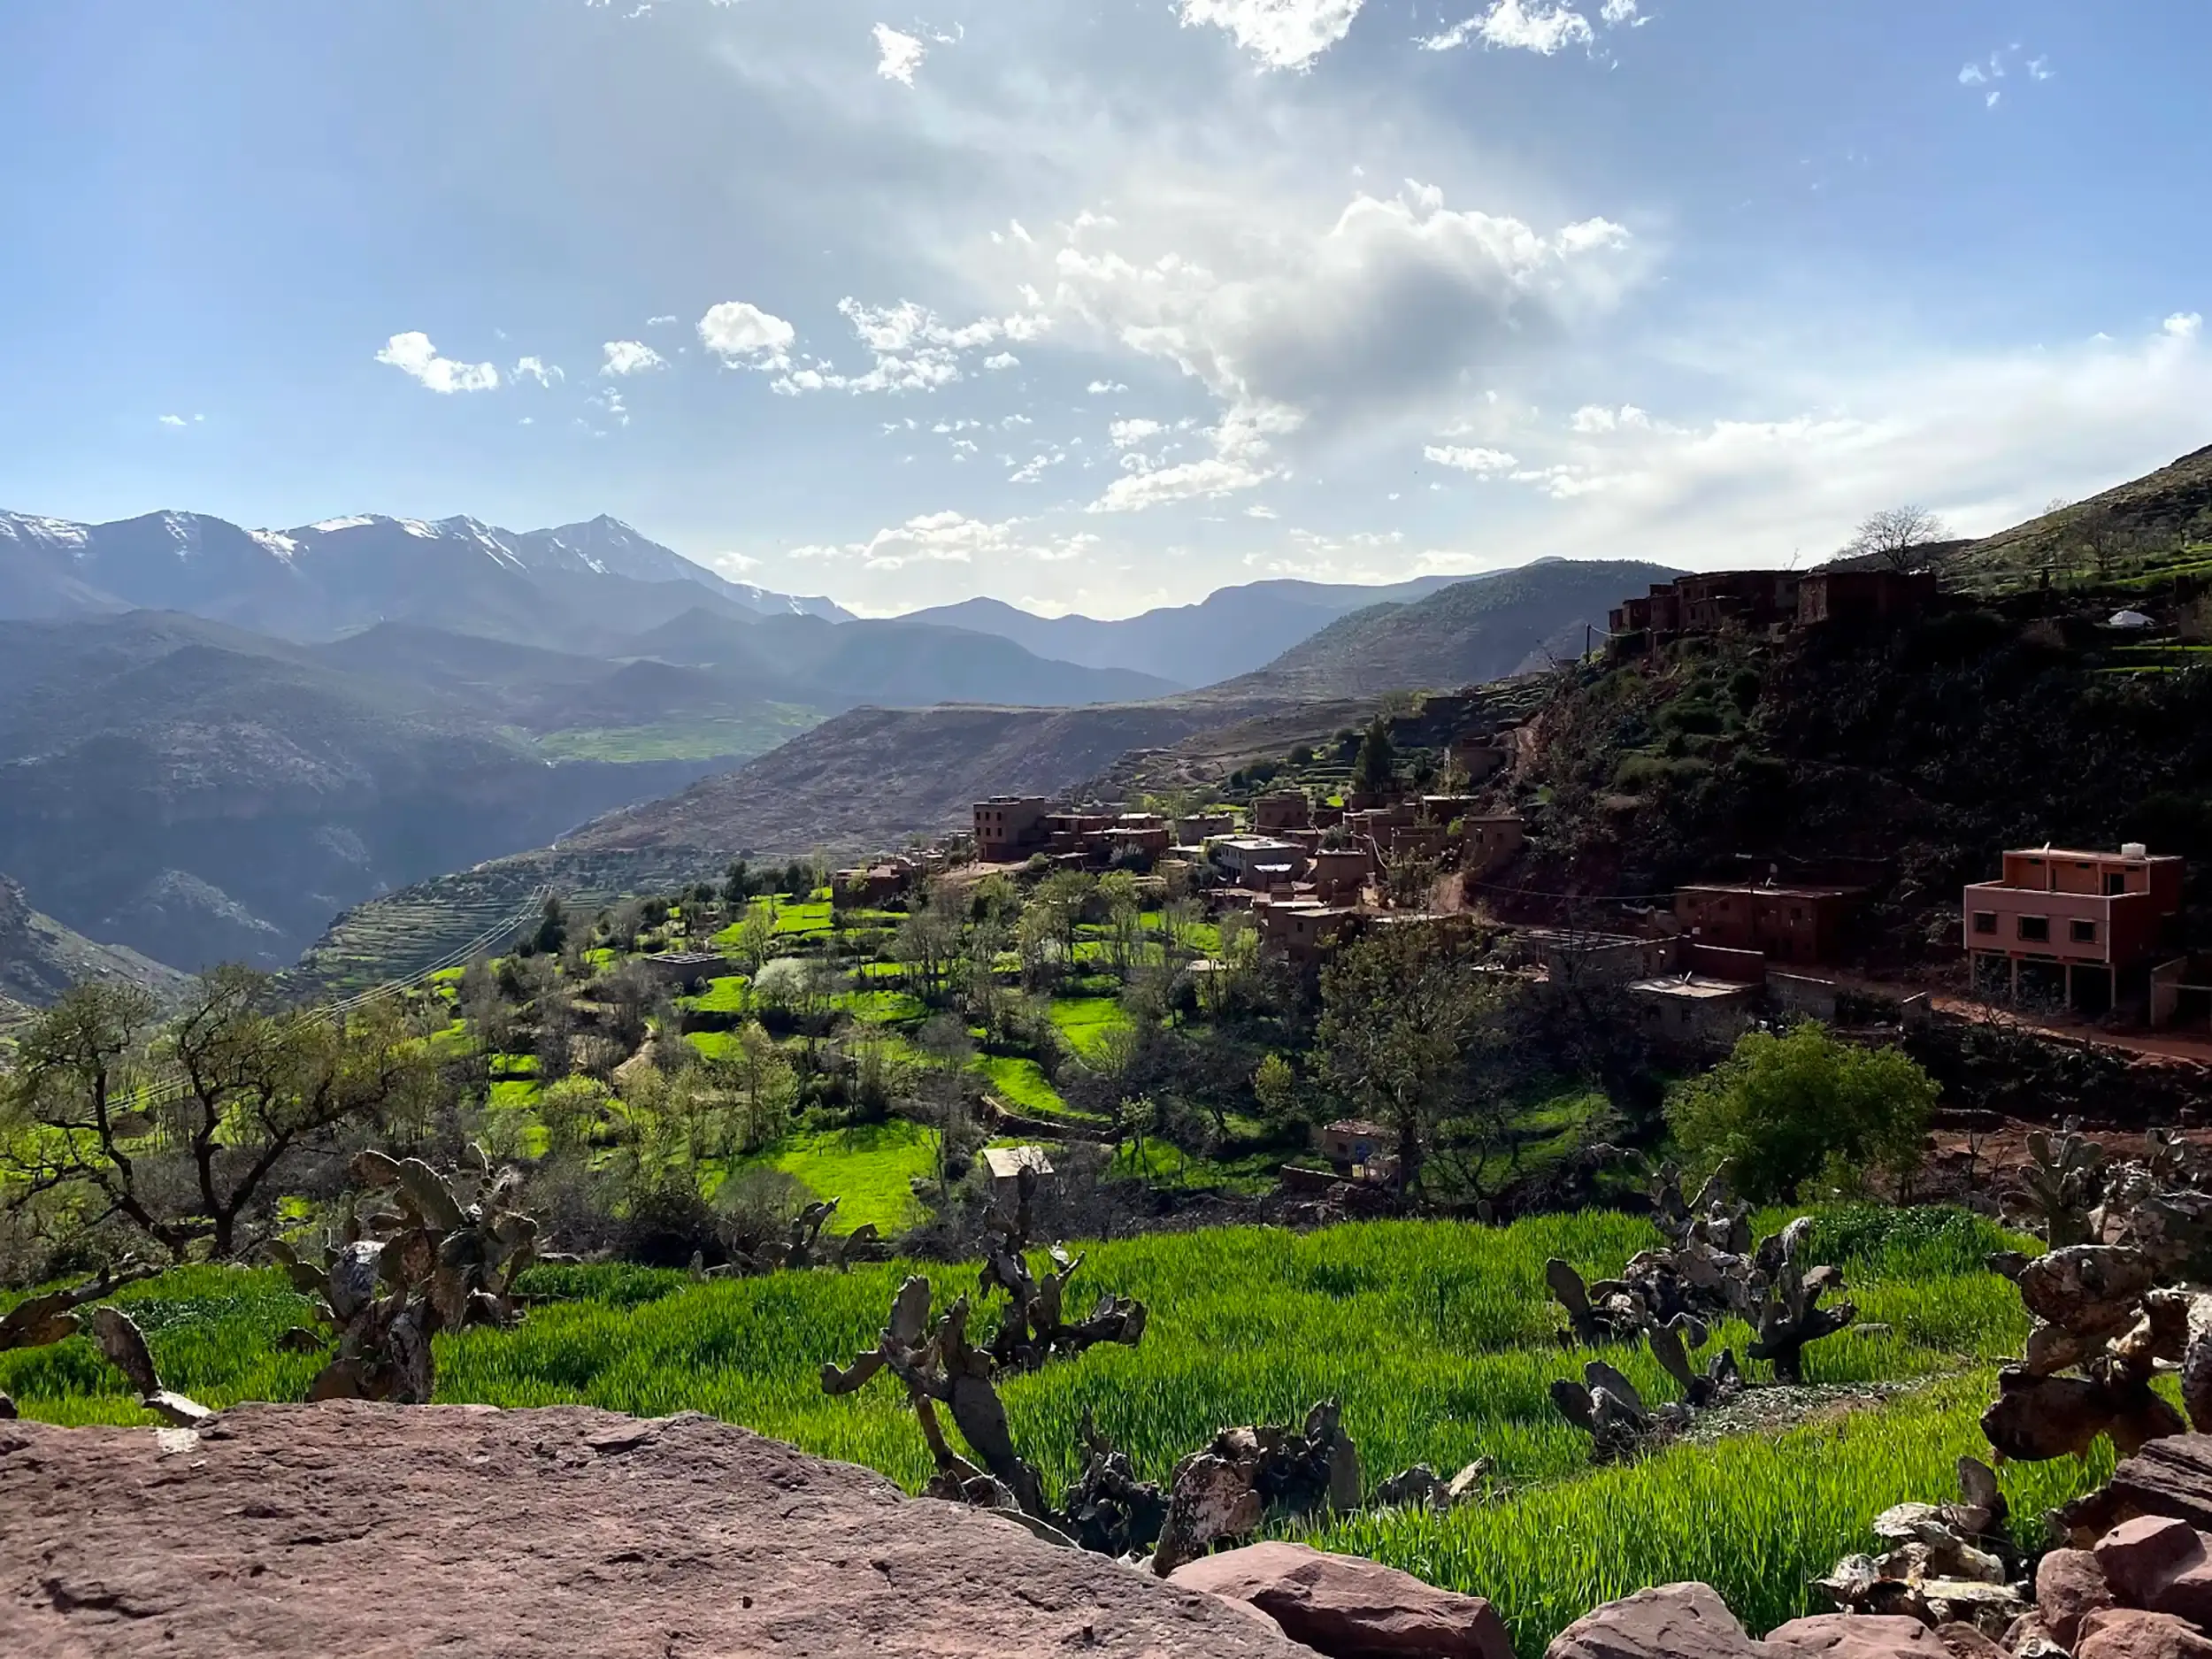 The Ourika Valley, a nature destination to explore during your stay in our guesthouse in Marrakech.